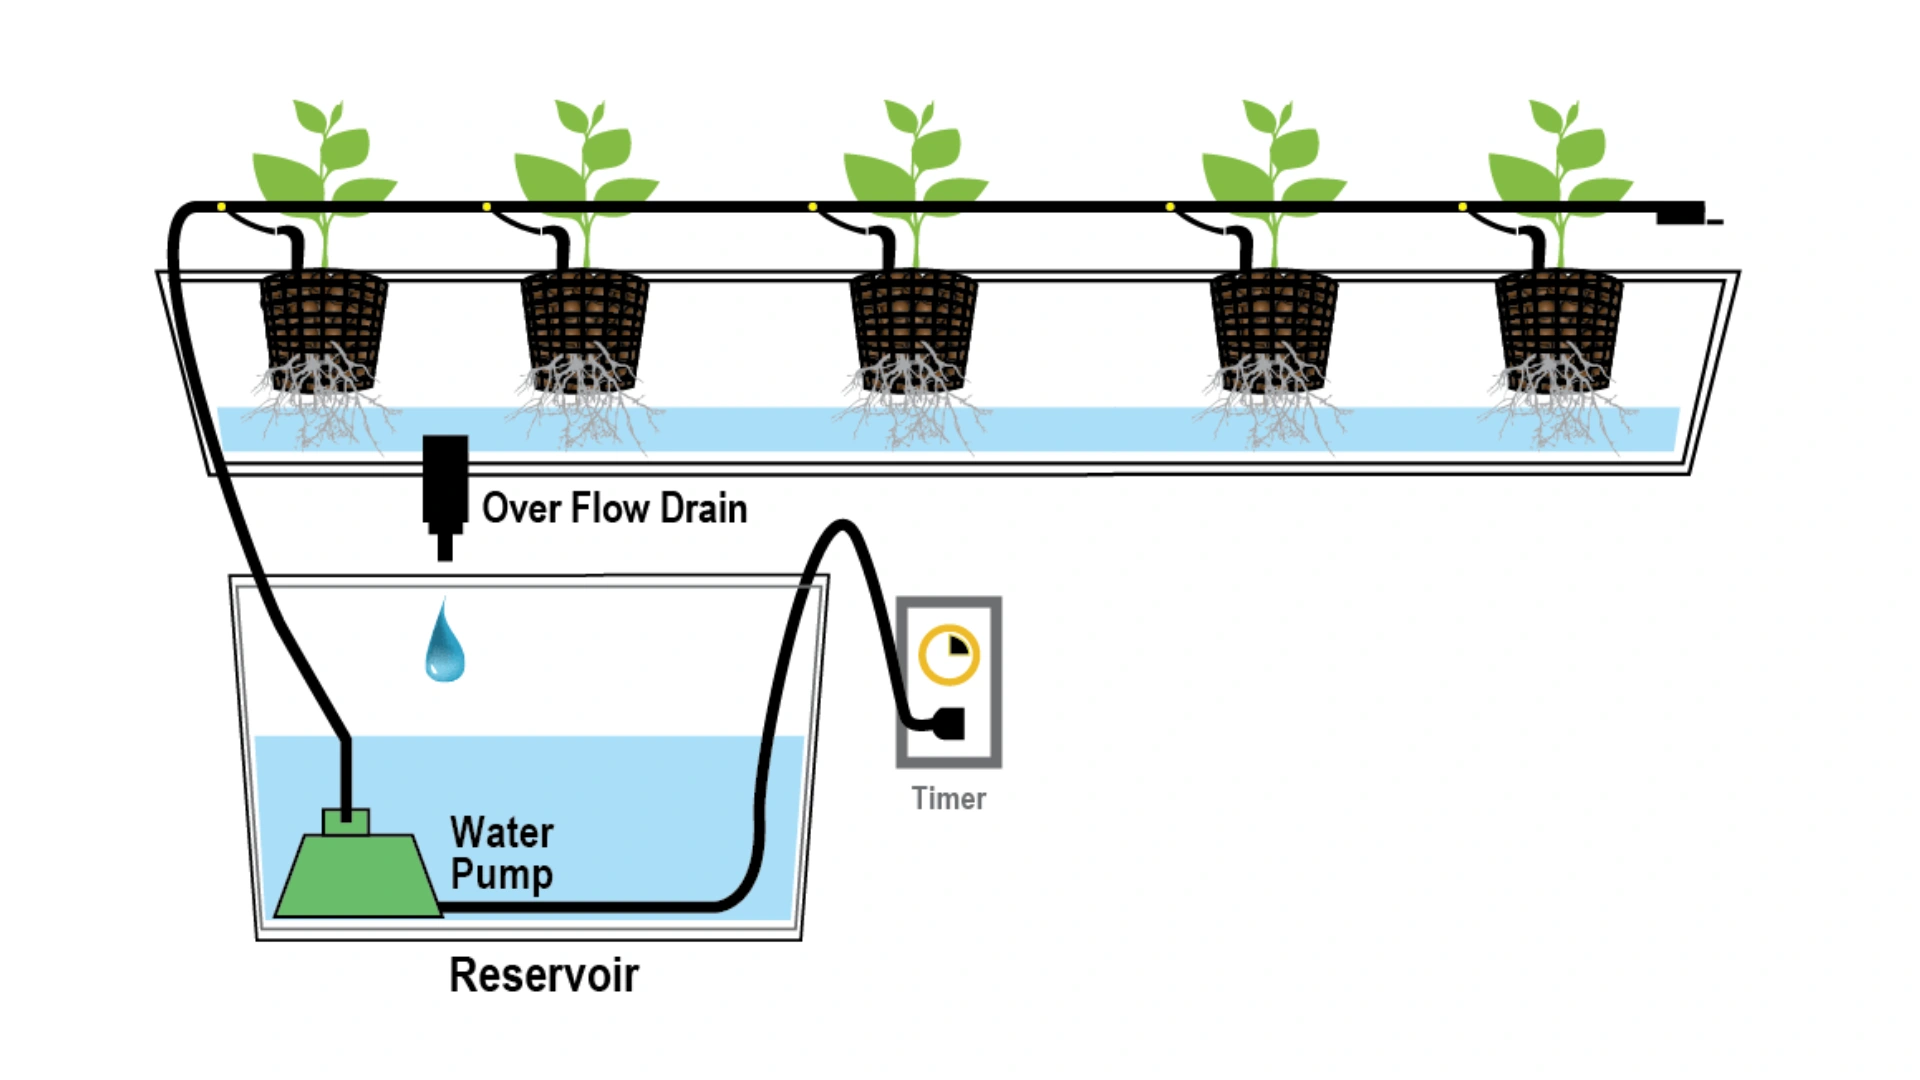 The Drip Irrigation System